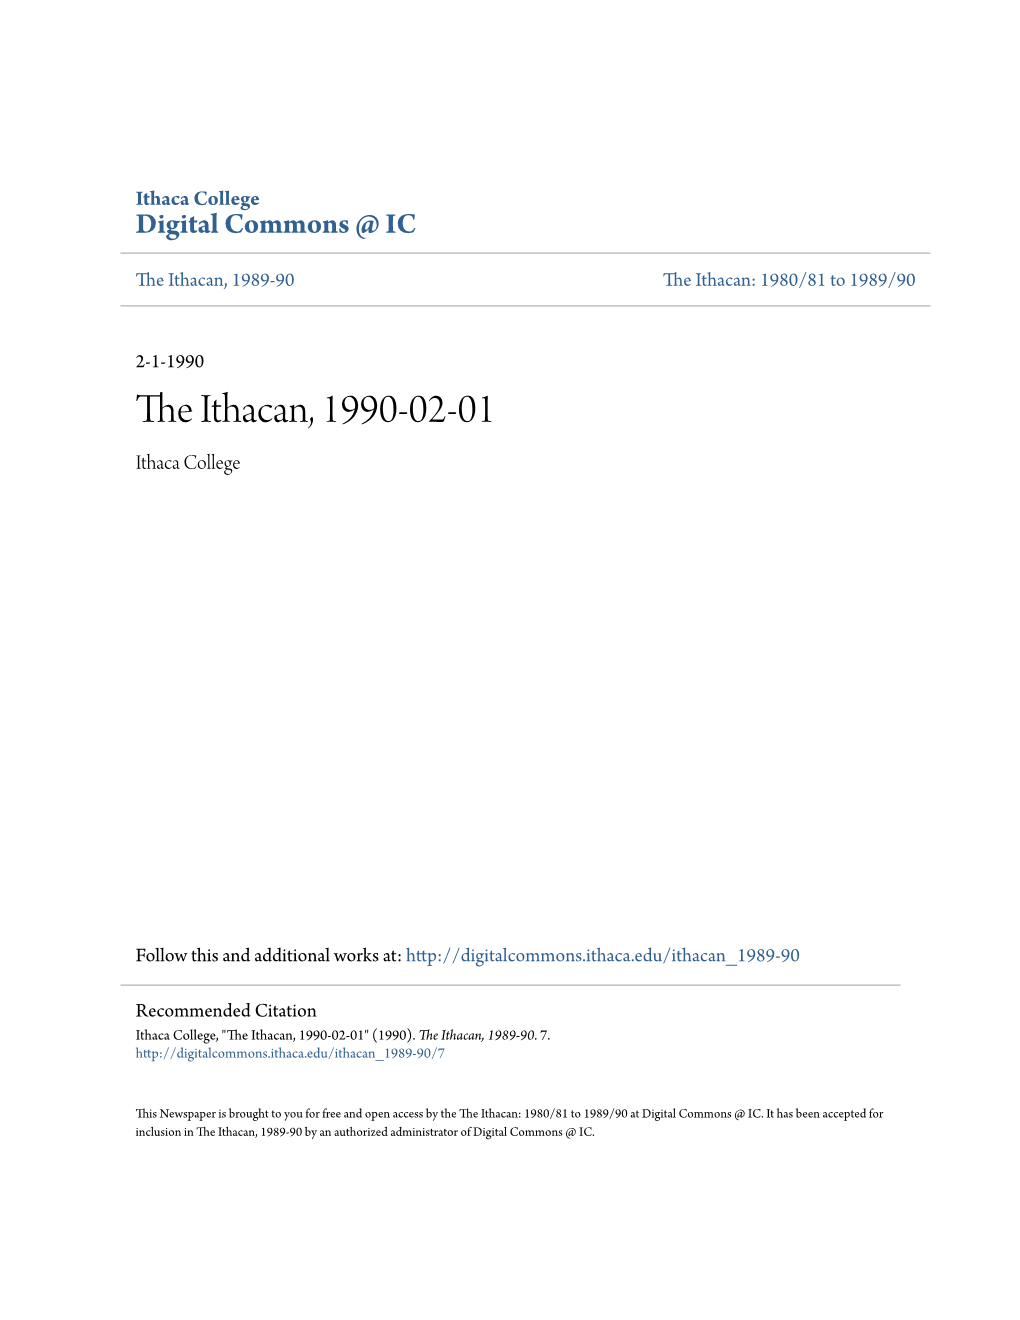 The Ithacan, 1990-02-01